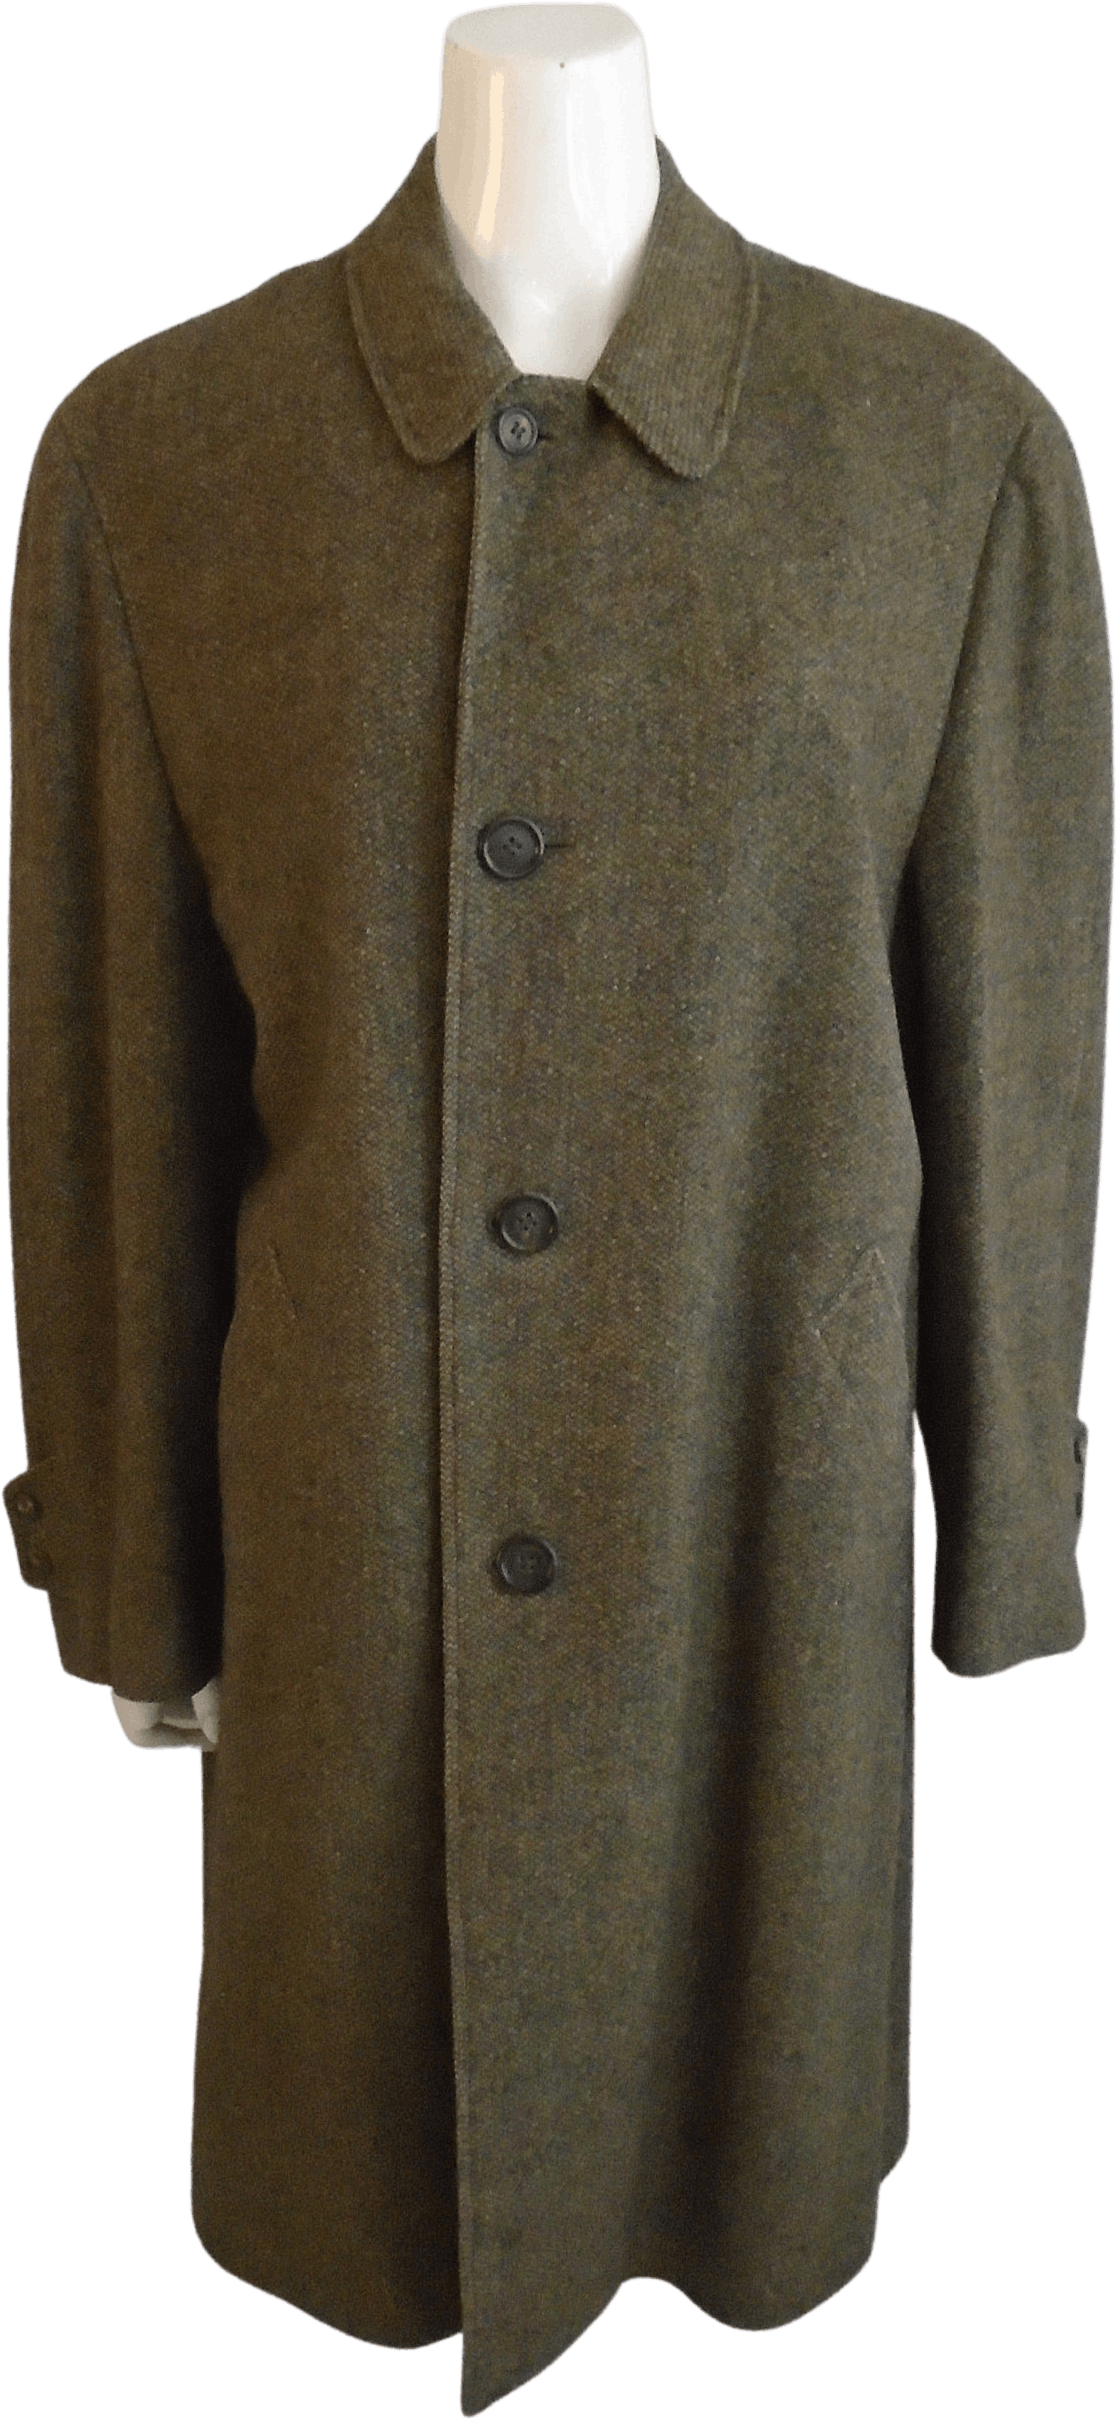 Vintage 50’s Olive Green Wool Tweed Button Up Men's Coat by Cavalier ...